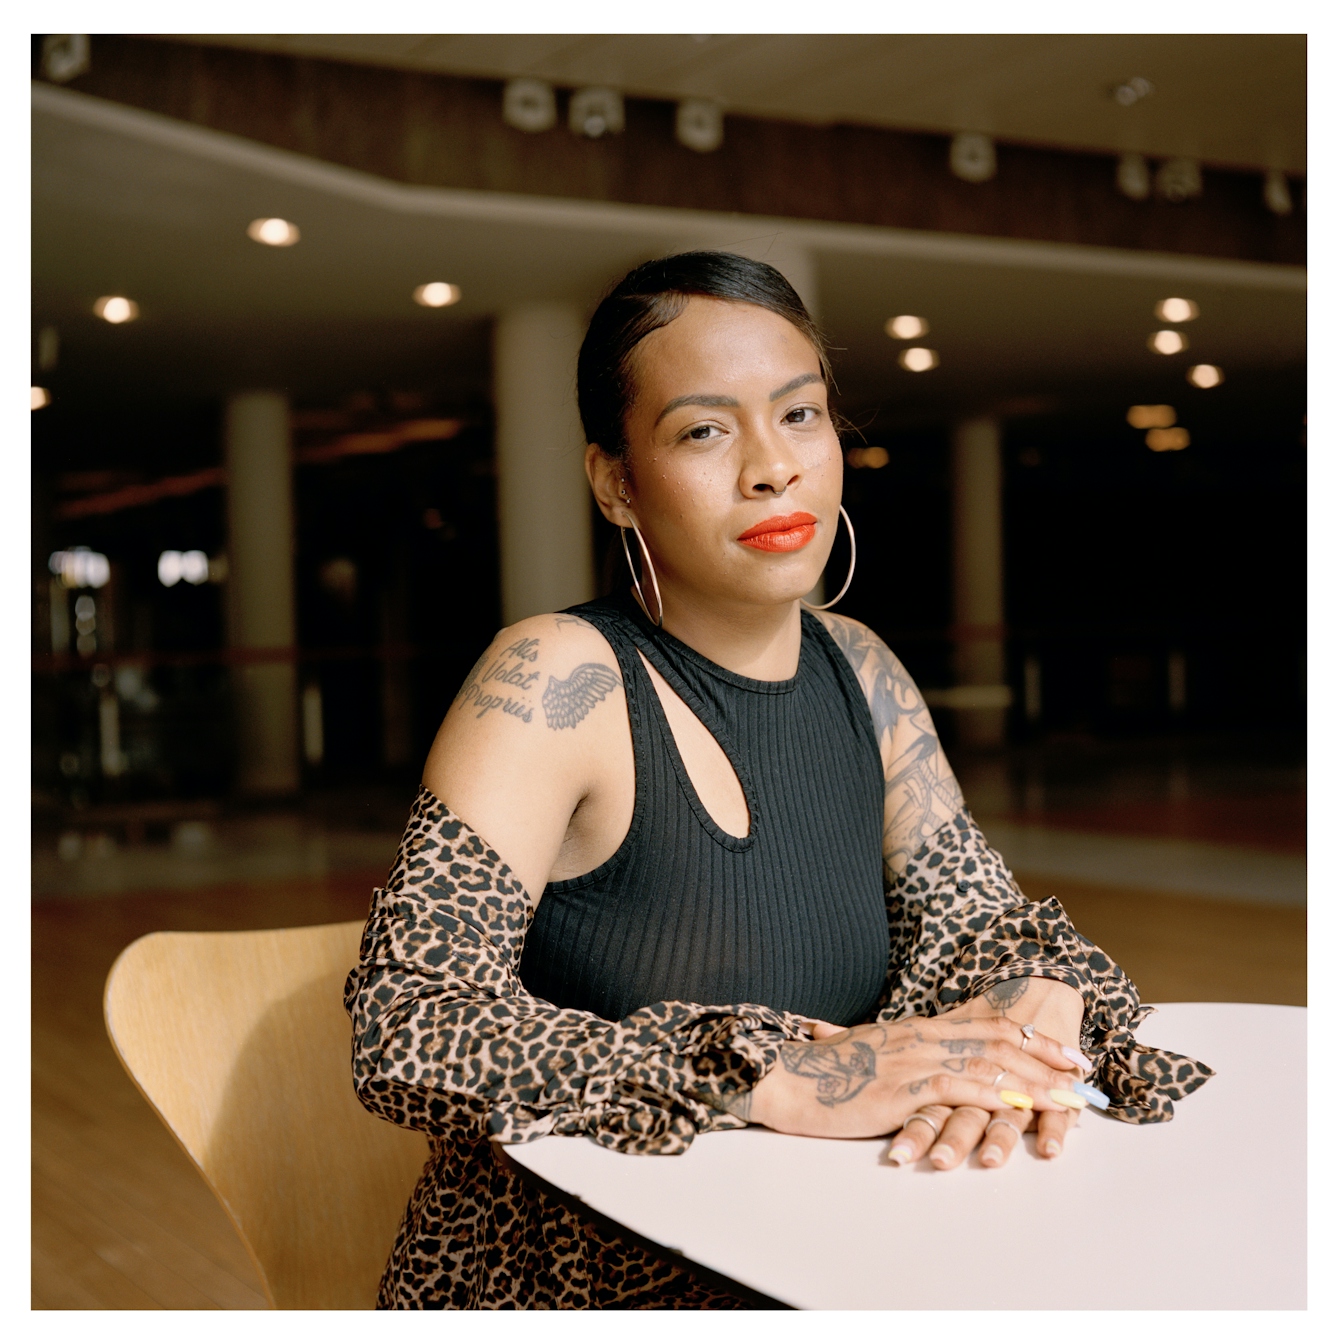 Portrait photograph of Lauren, a young Black woman, sitting on wooden chair. She has several tattoos on her arms and is wearing a black sleeveless top and a leopard print skirt. She has large hoop earrings and is wearing an orange red lipstick. 

She is looking straight to camera with a quiet smile. Behind her, there is an exhibition space which is empty apart from several wooden chairs. 